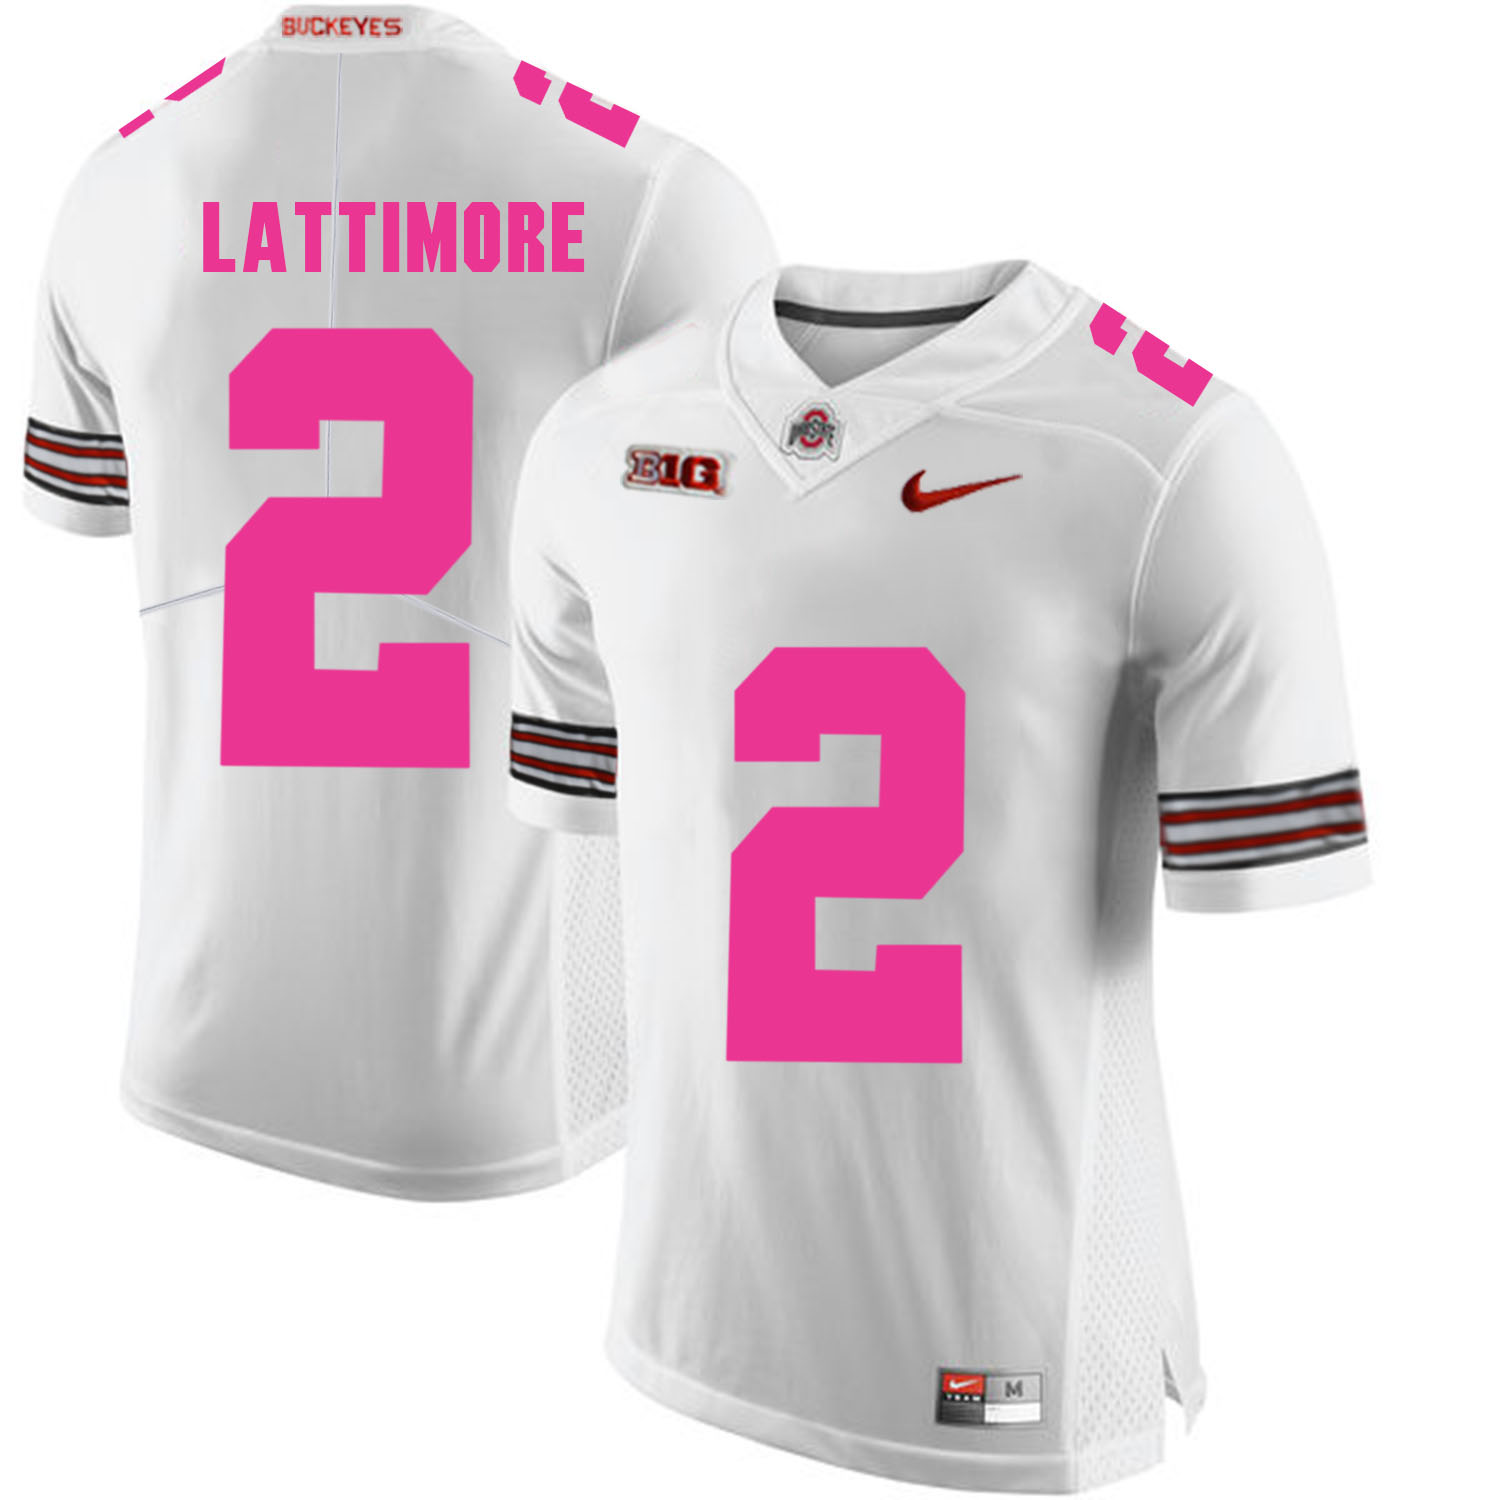 Ohio State Buckeyes 2 Overview Lattimore White 2018 Breast Cancer Awareness College Football Jersey